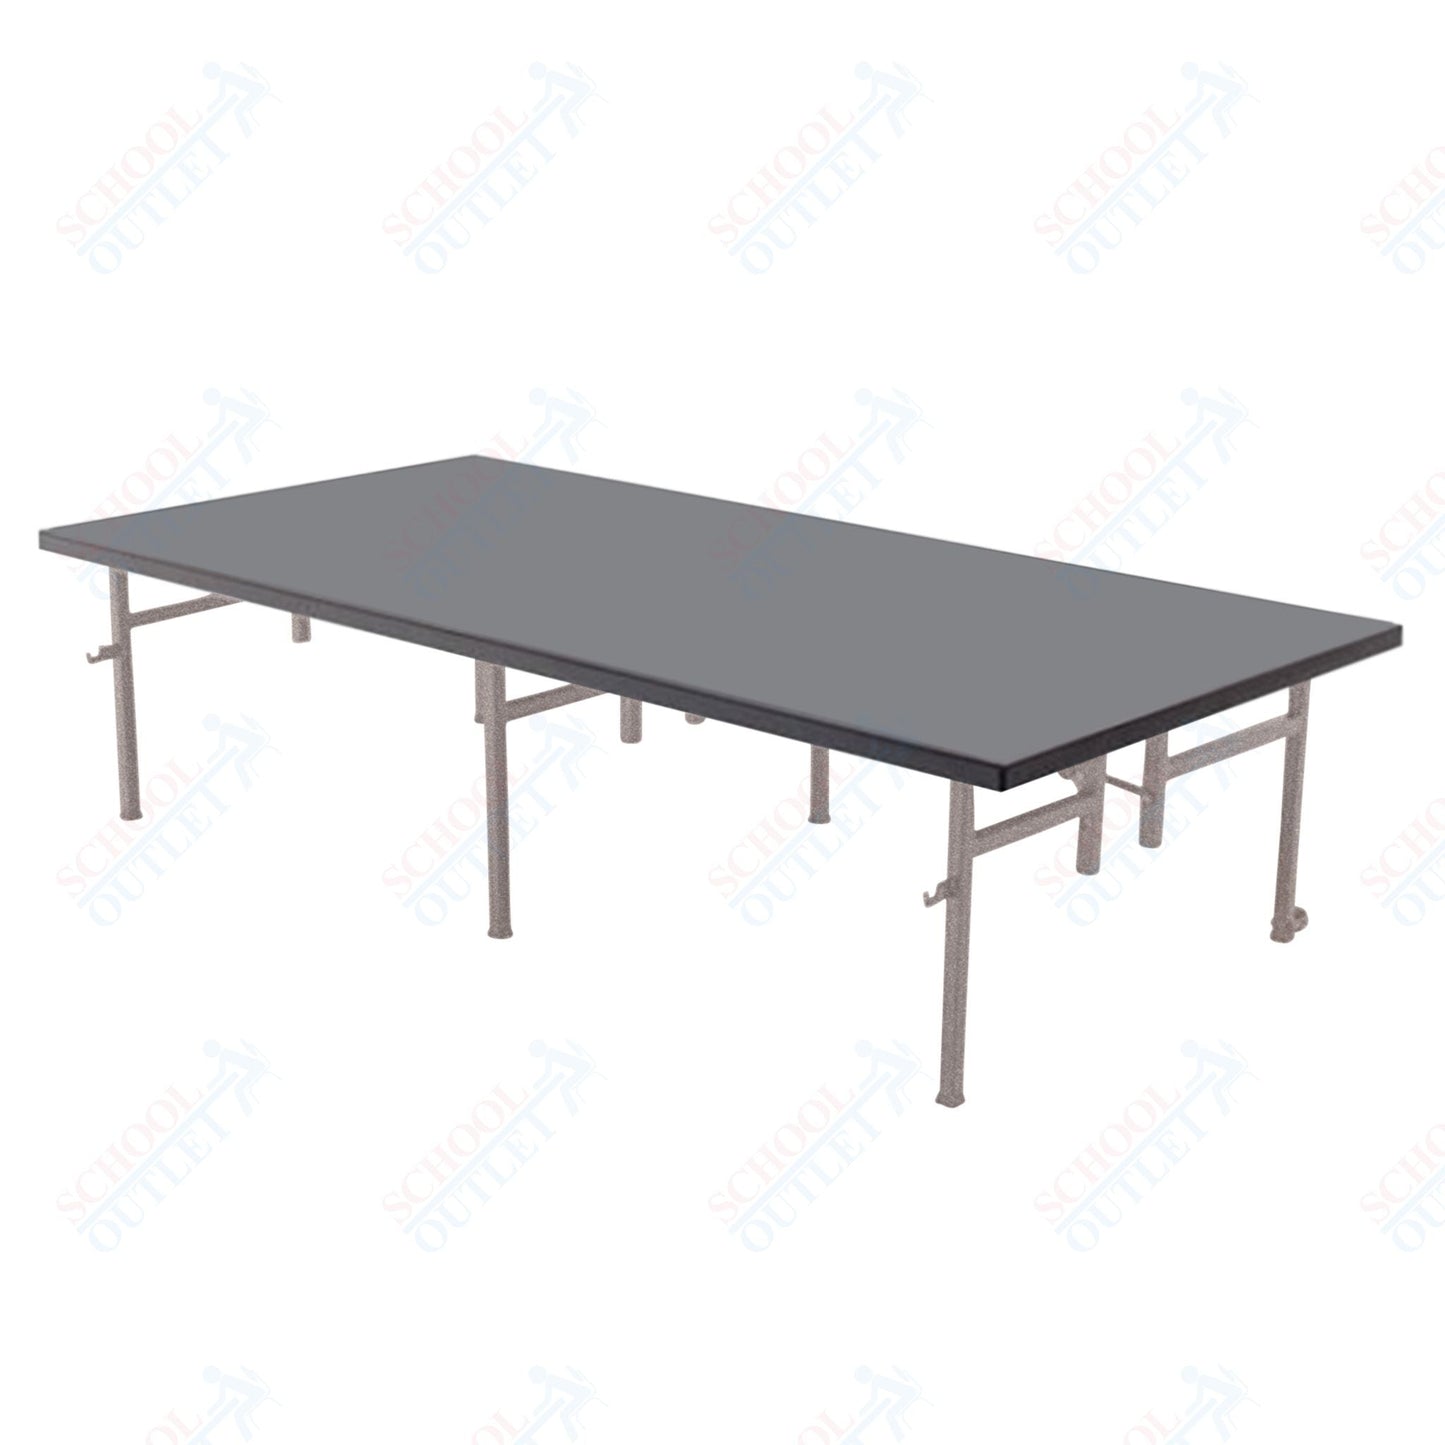 AmTab Fixed Height Stage - Polypropylene Top - 48"W x 96"L x 32"H (AmTab AMT - ST4832P) - SchoolOutlet